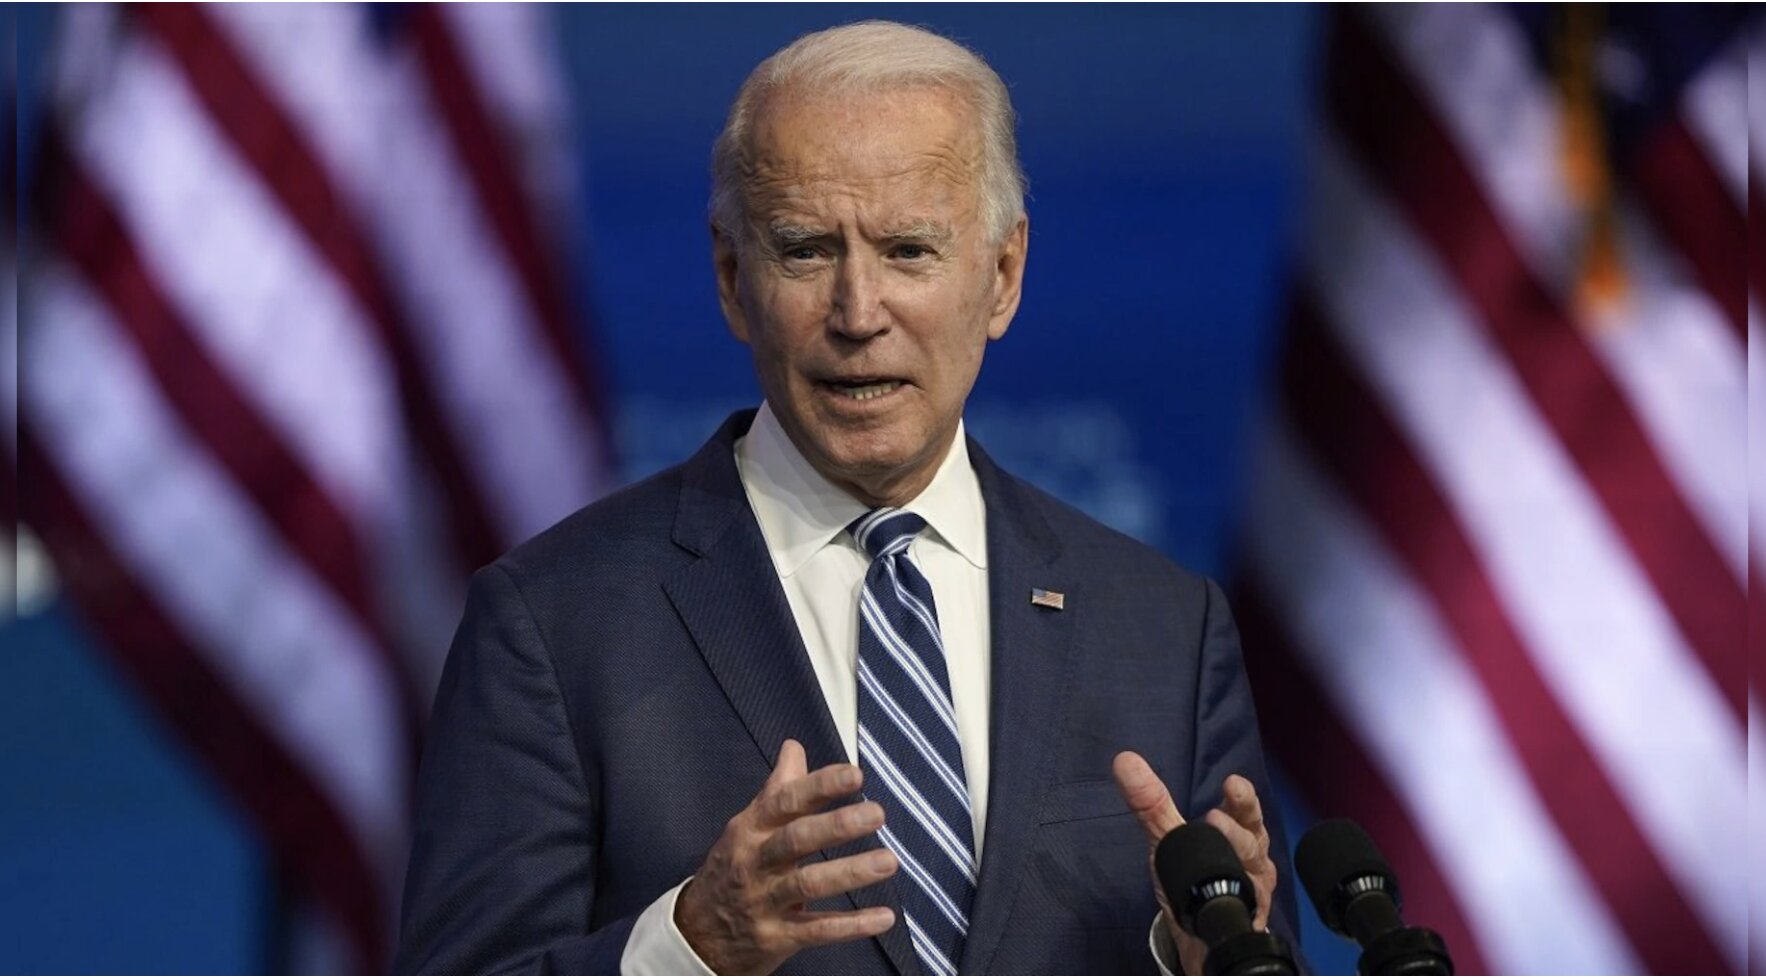 Tax filings reveal Biden cancer charity spent millions on salaries, zero on research